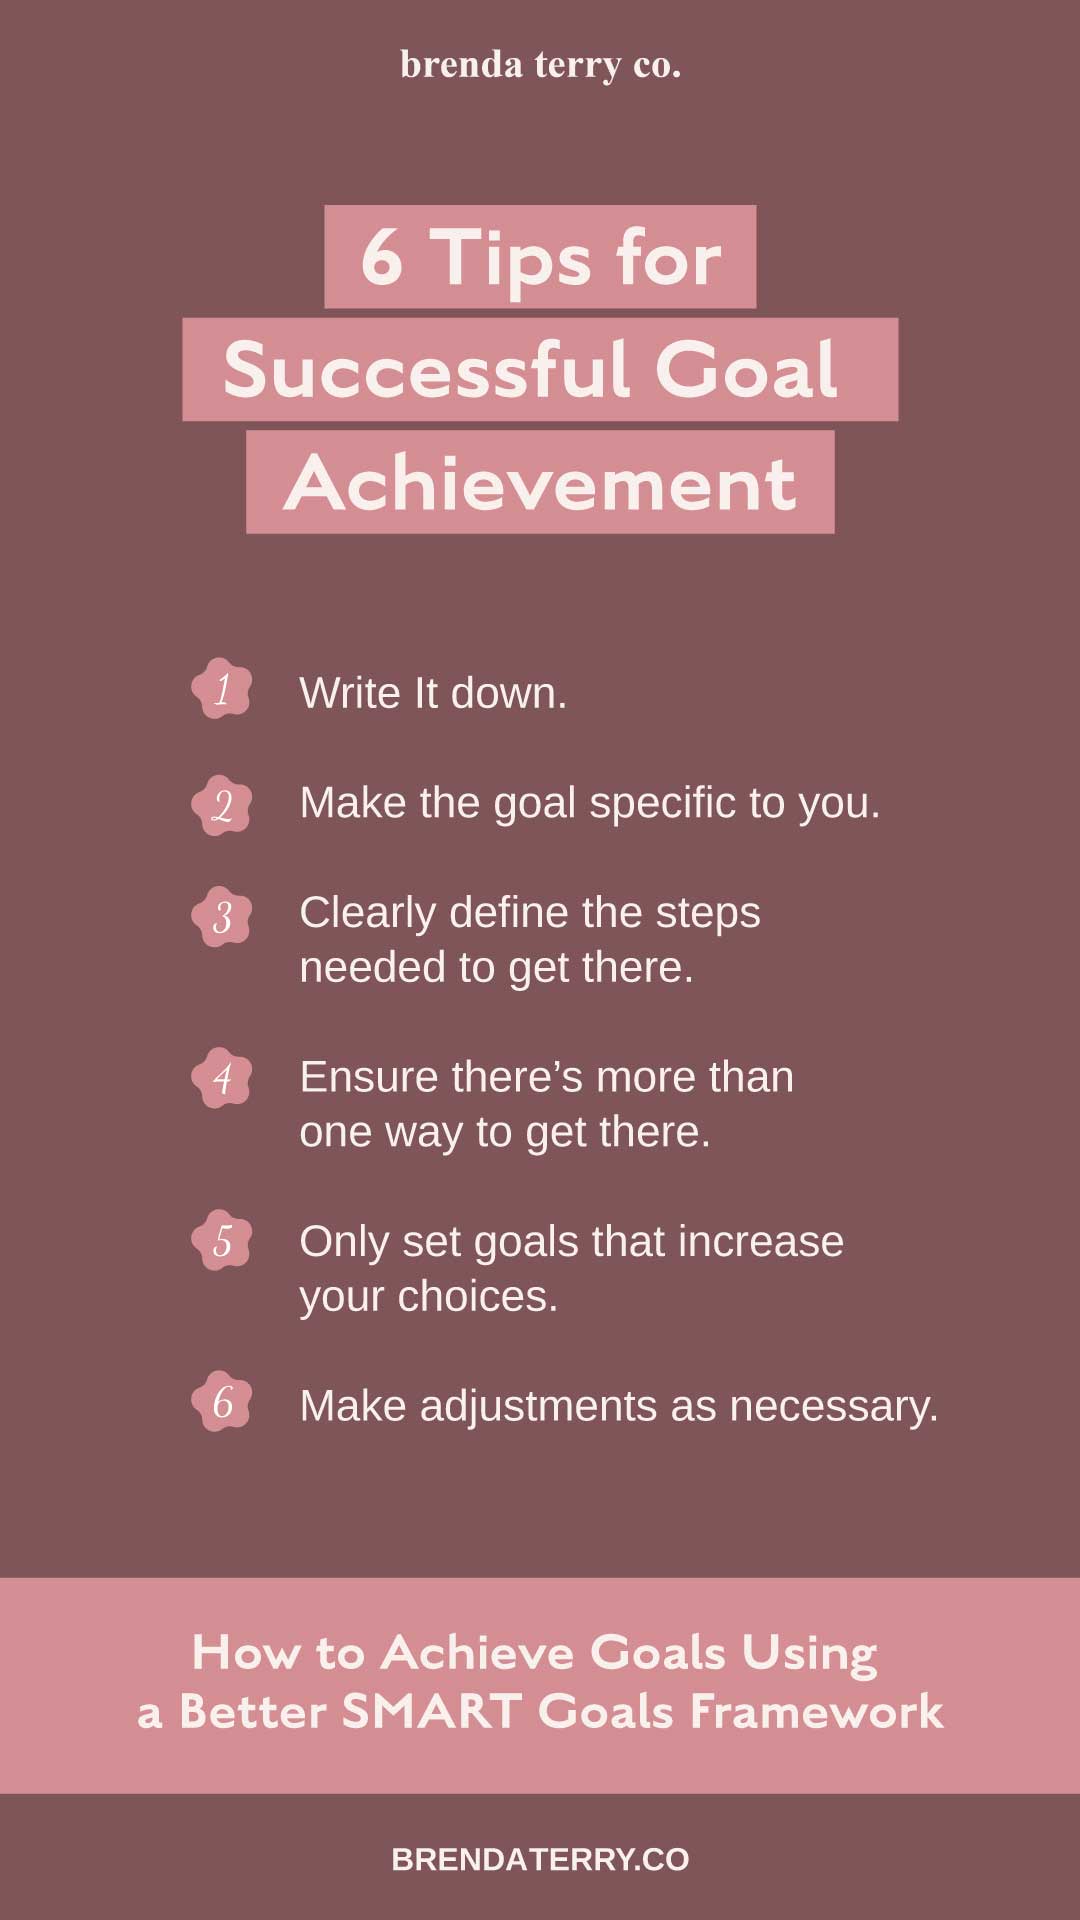 Tips for goal achievement